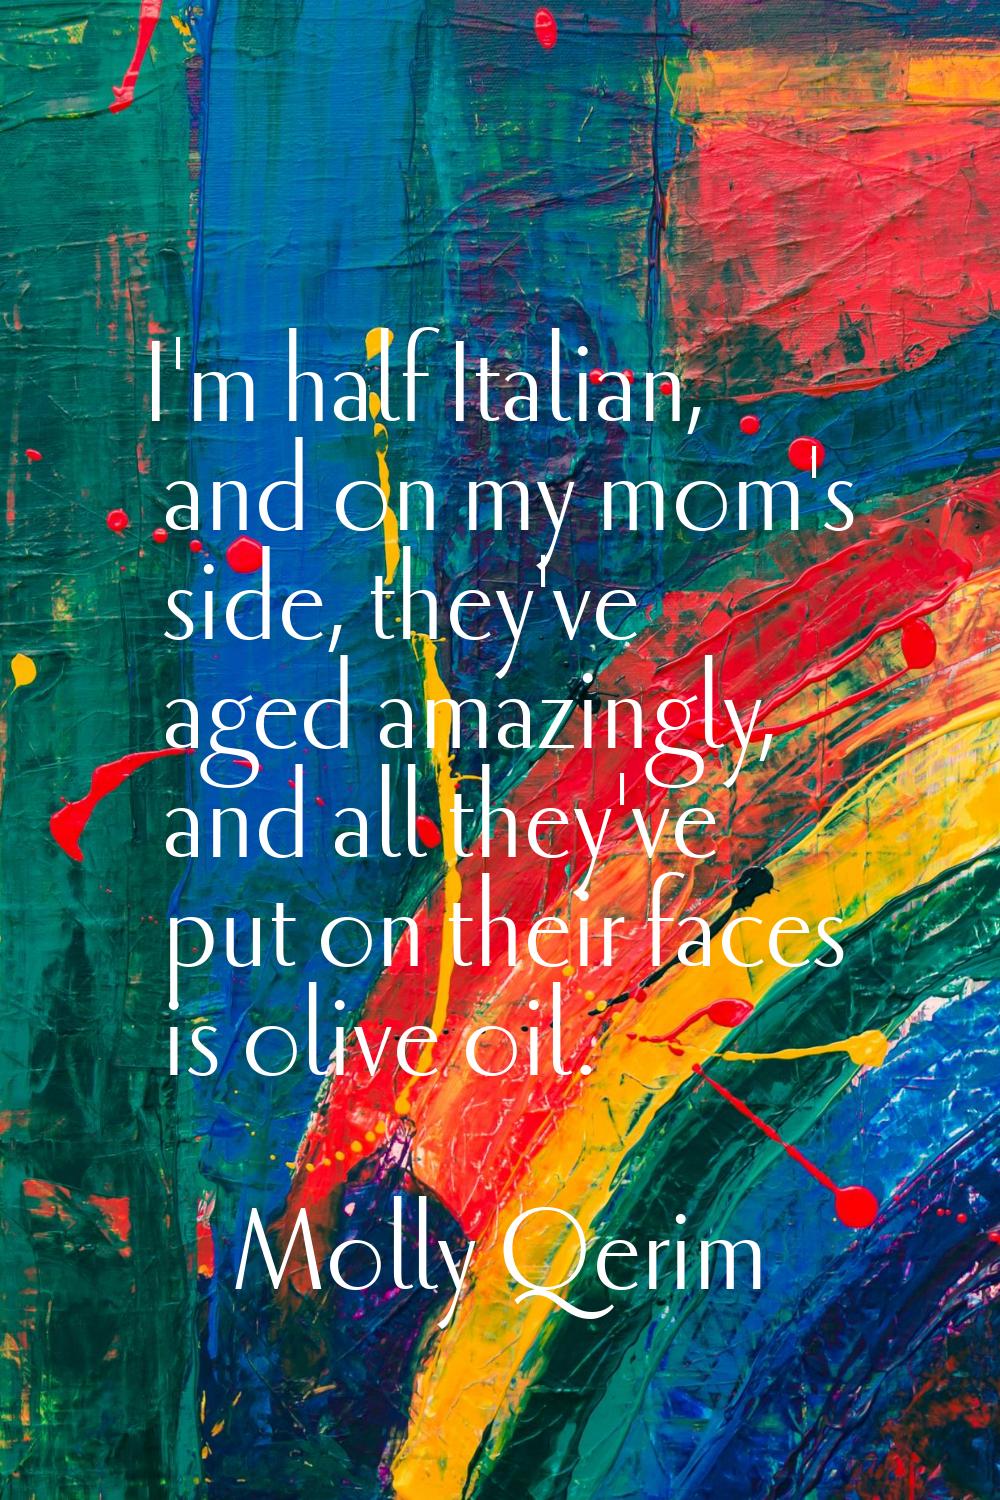 I'm half Italian, and on my mom's side, they've aged amazingly, and all they've put on their faces 